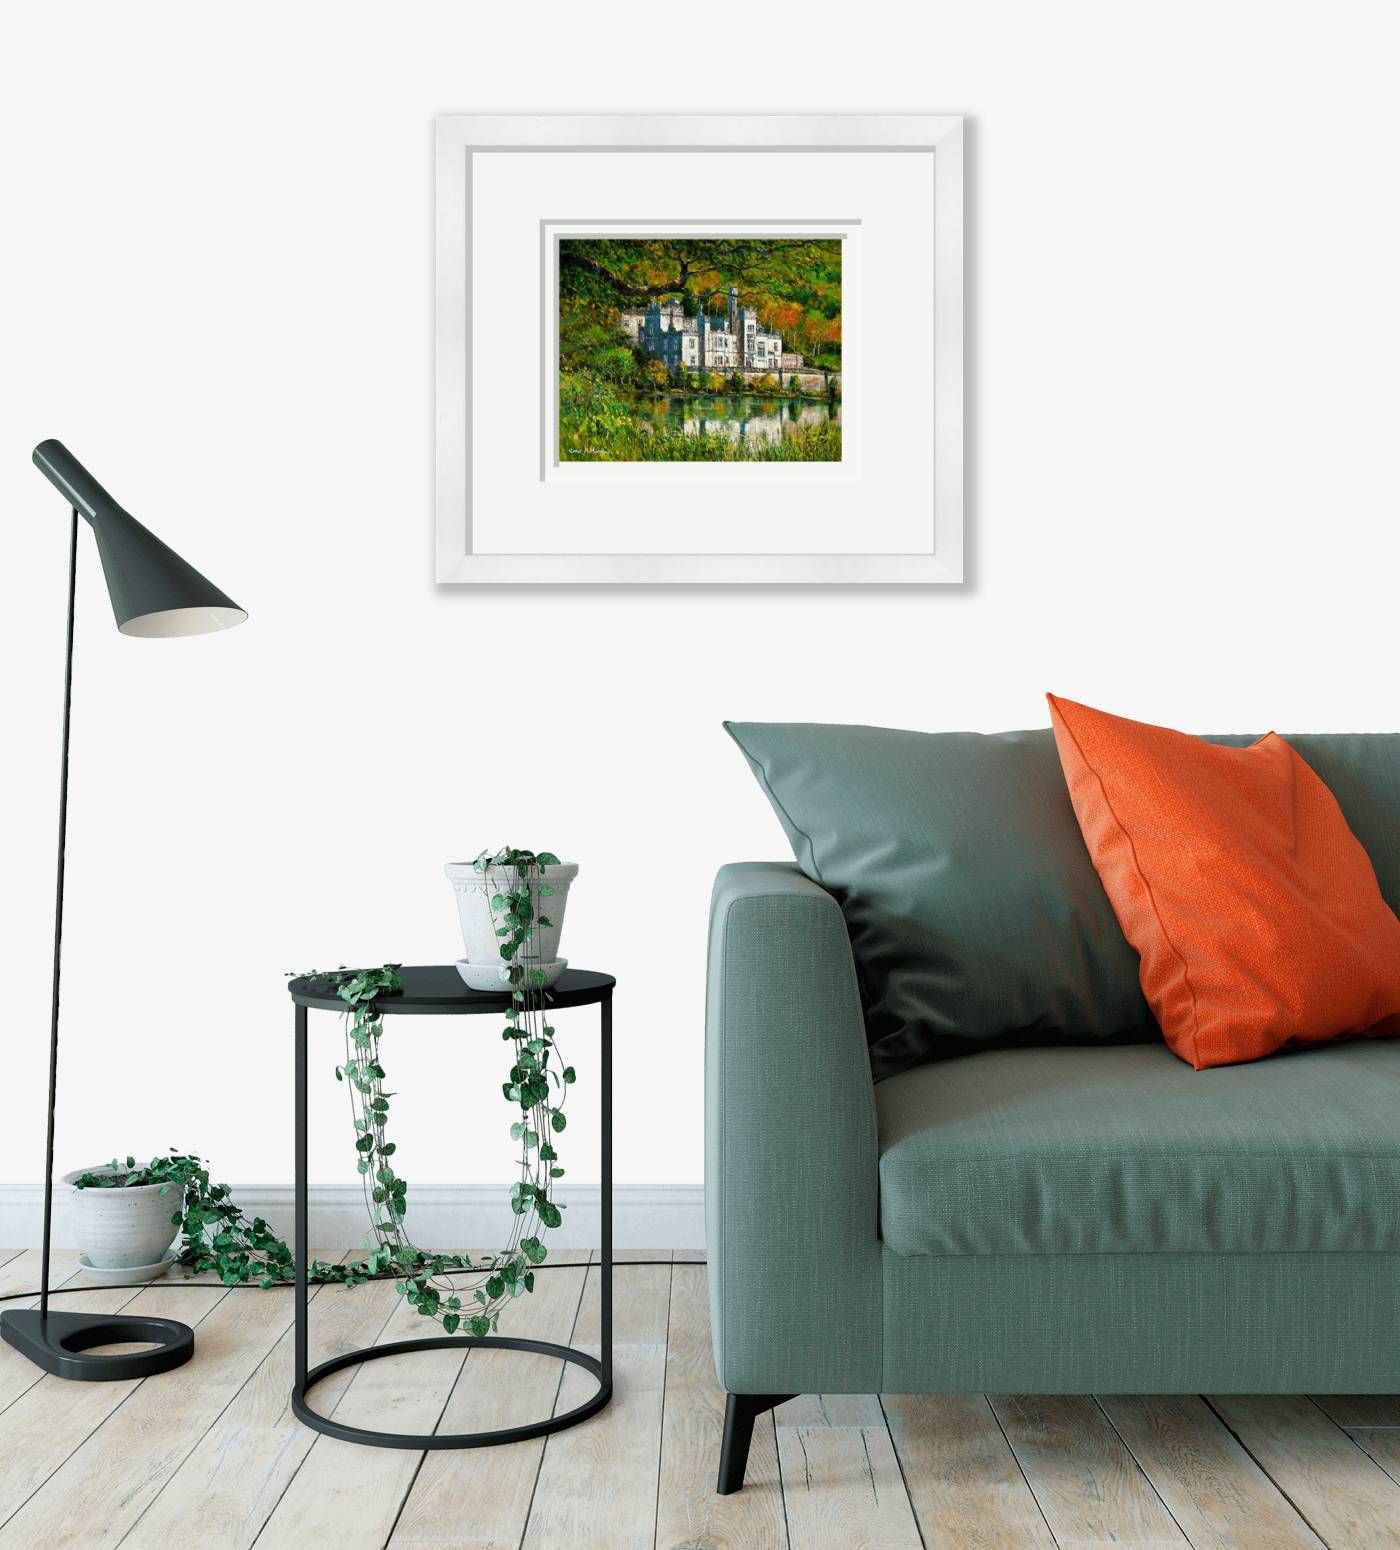 Large framed - Kylemore Abbey, Connemara, Galway - 518 by Chris McMorrow